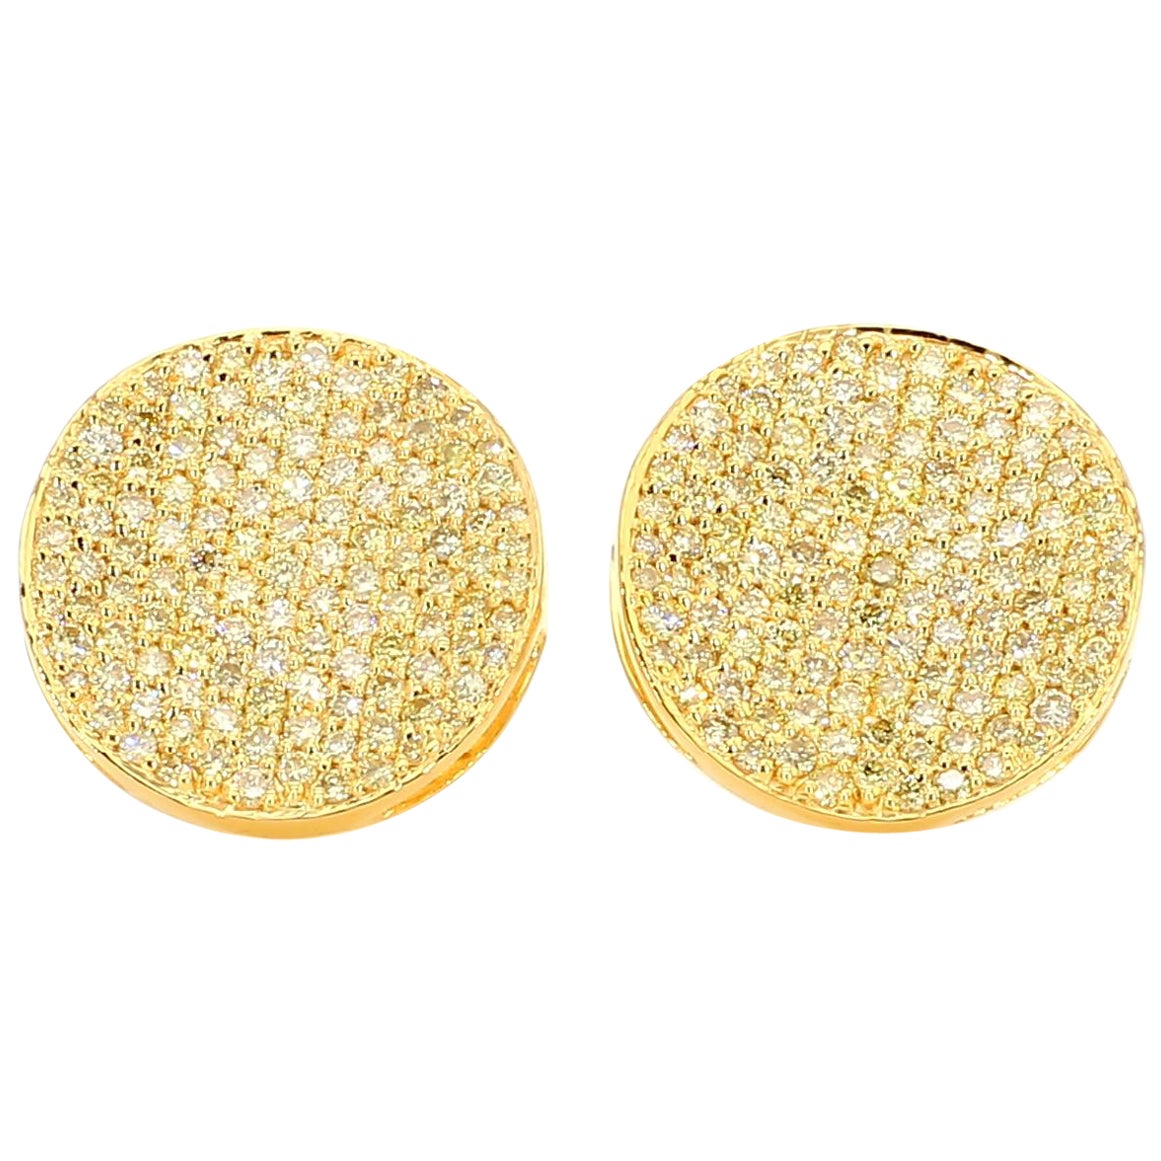 Natural Yellow Round Diamond 1.32 Carat TW Yellow Gold Stud Earrings For Sale